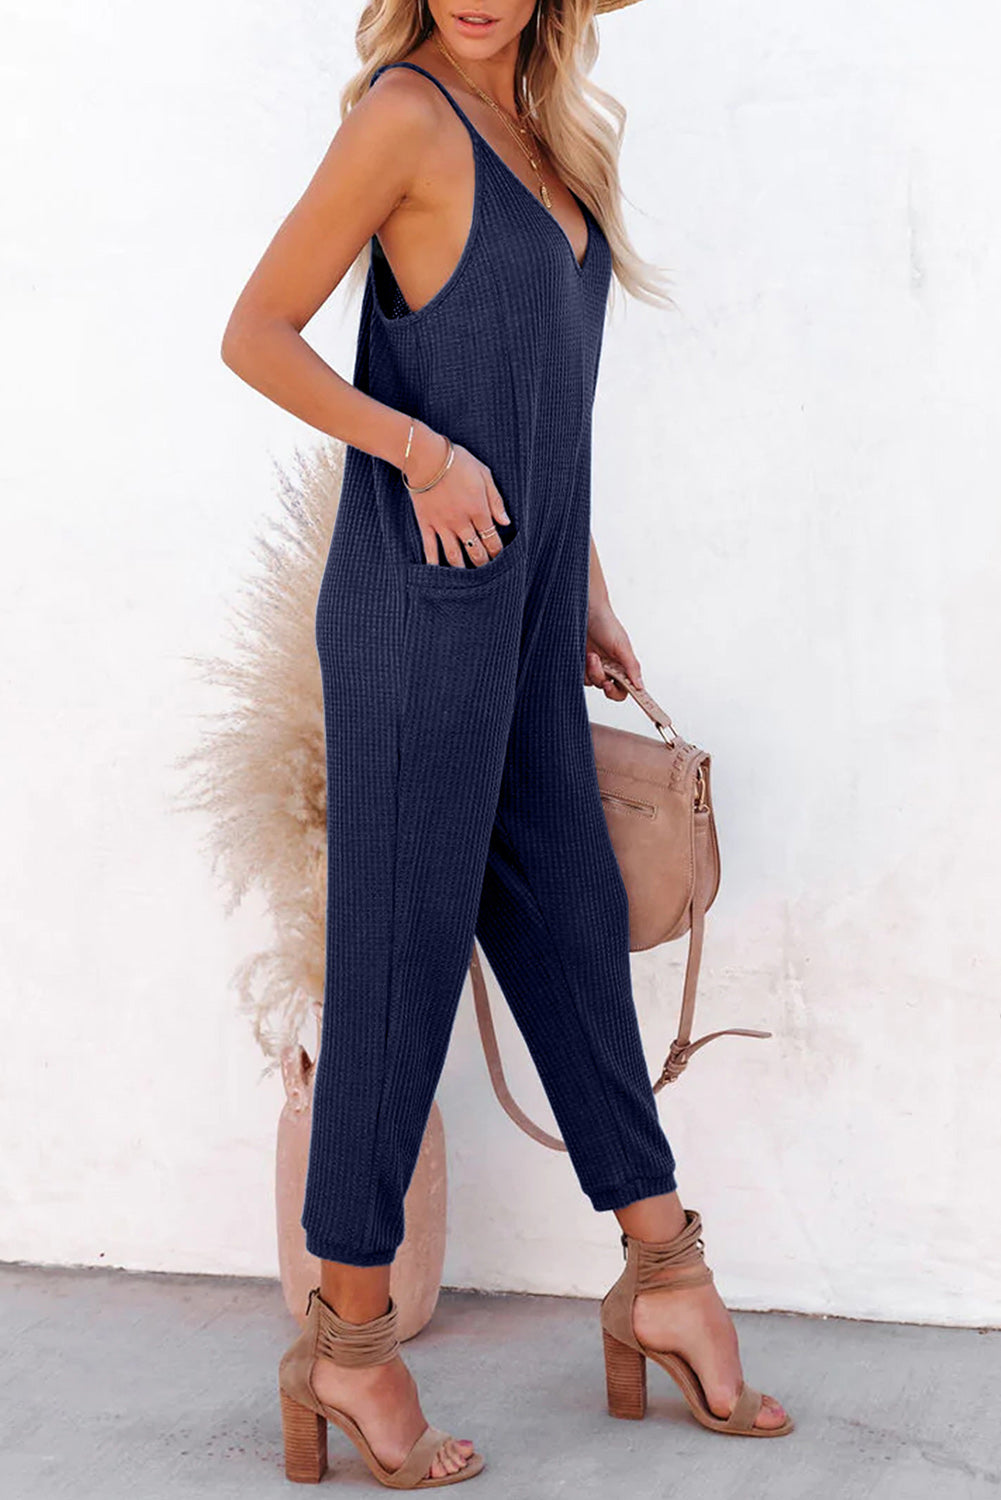 Sleeveless V-Neck Pocketed Casual Jumpsuit